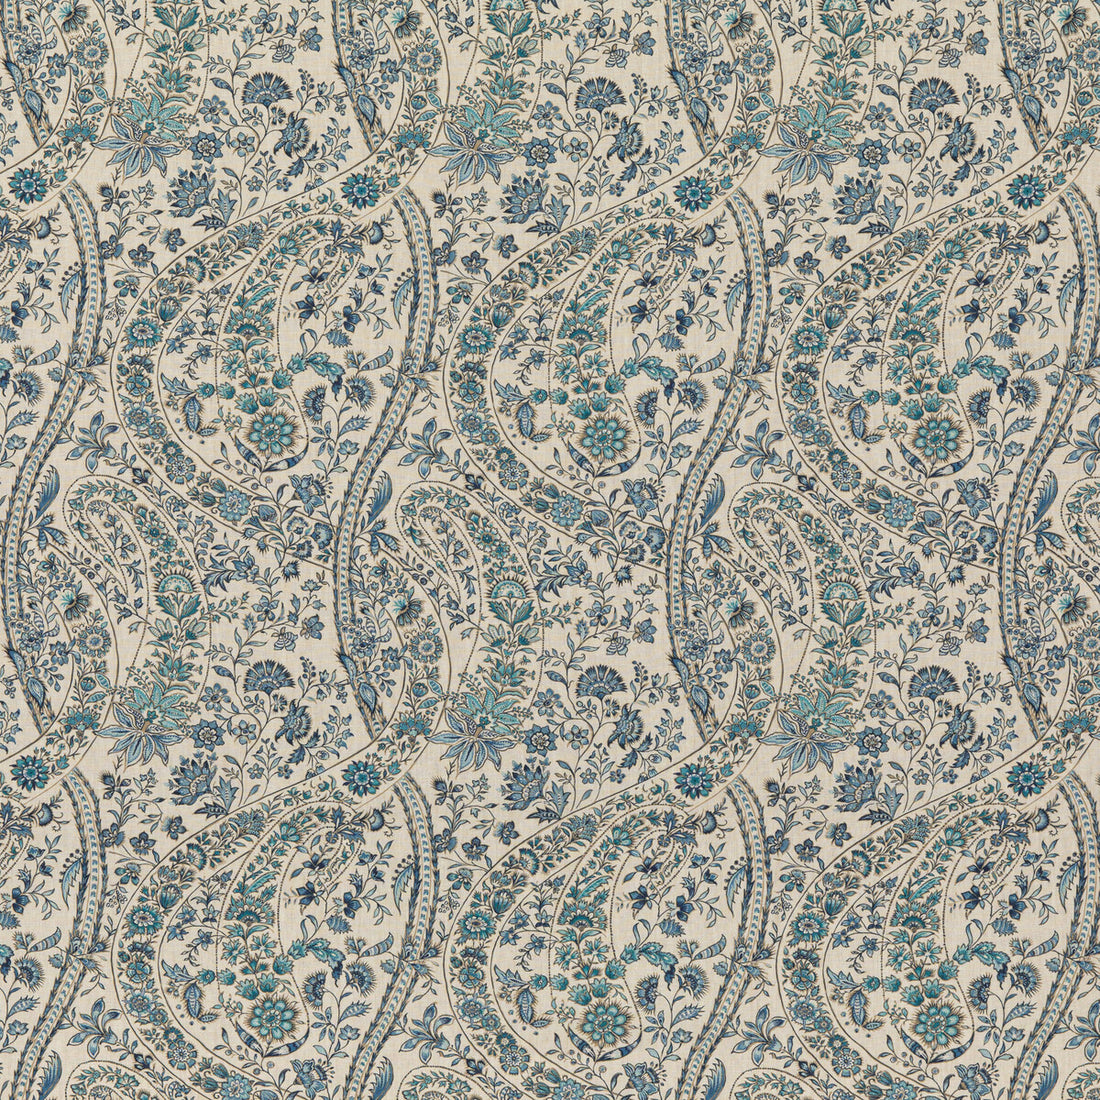 Bukhara Paisley fabric in blue color - pattern BP10835.1.0 - by G P &amp; J Baker in the Coromandel collection